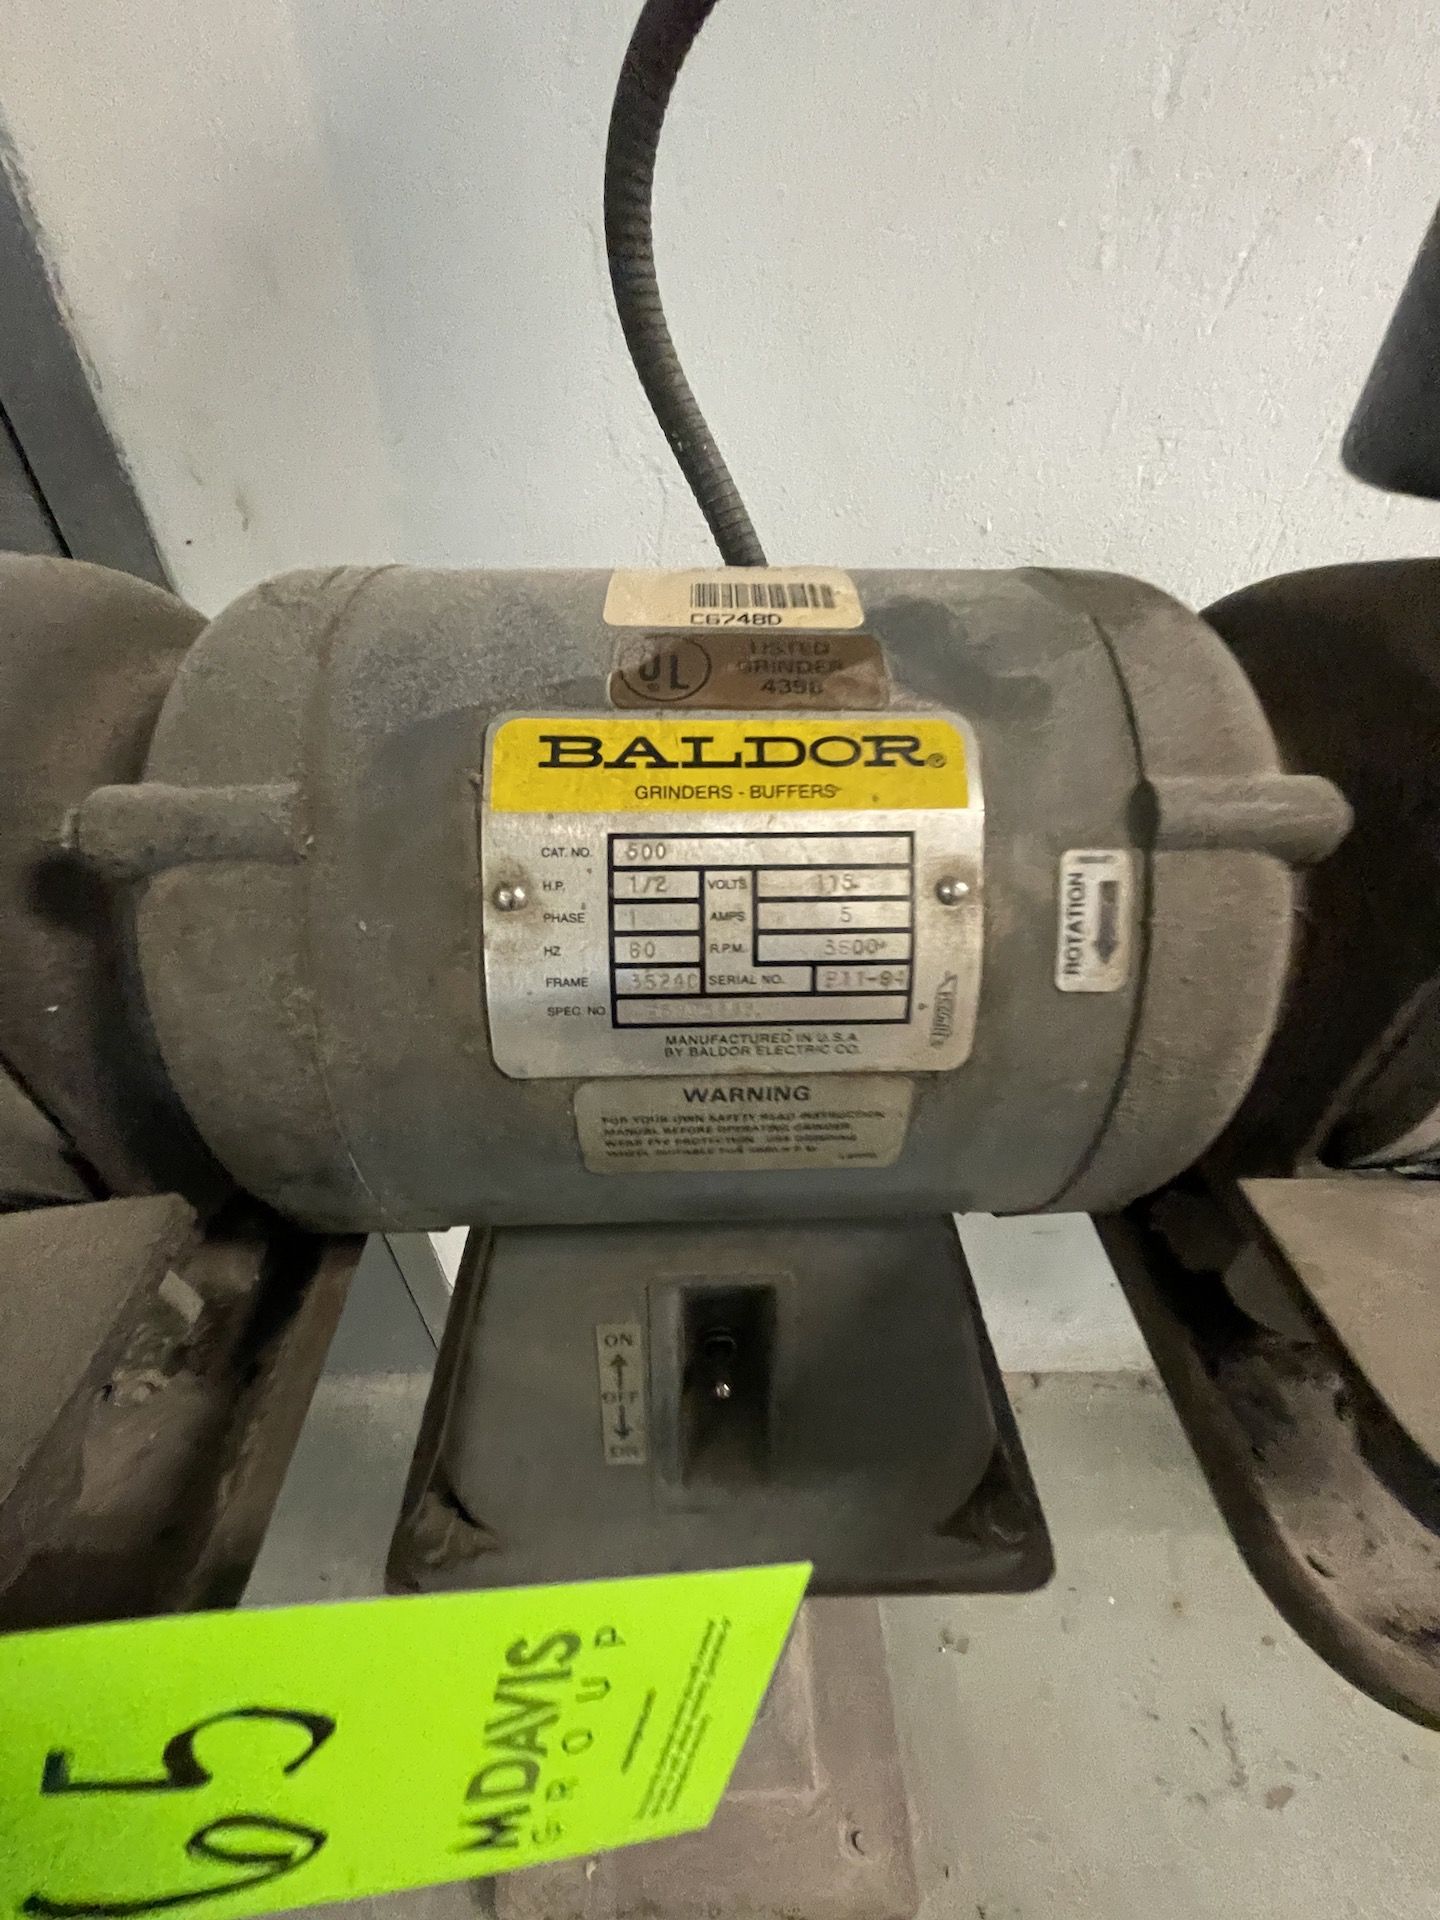 (1) BALDOR DOUBLE-END GRINDER, MODEL 439B, S/N P11-94, 1/2 HP, 3600 RPM (Non-Negotiable Rigging, - Image 4 of 4